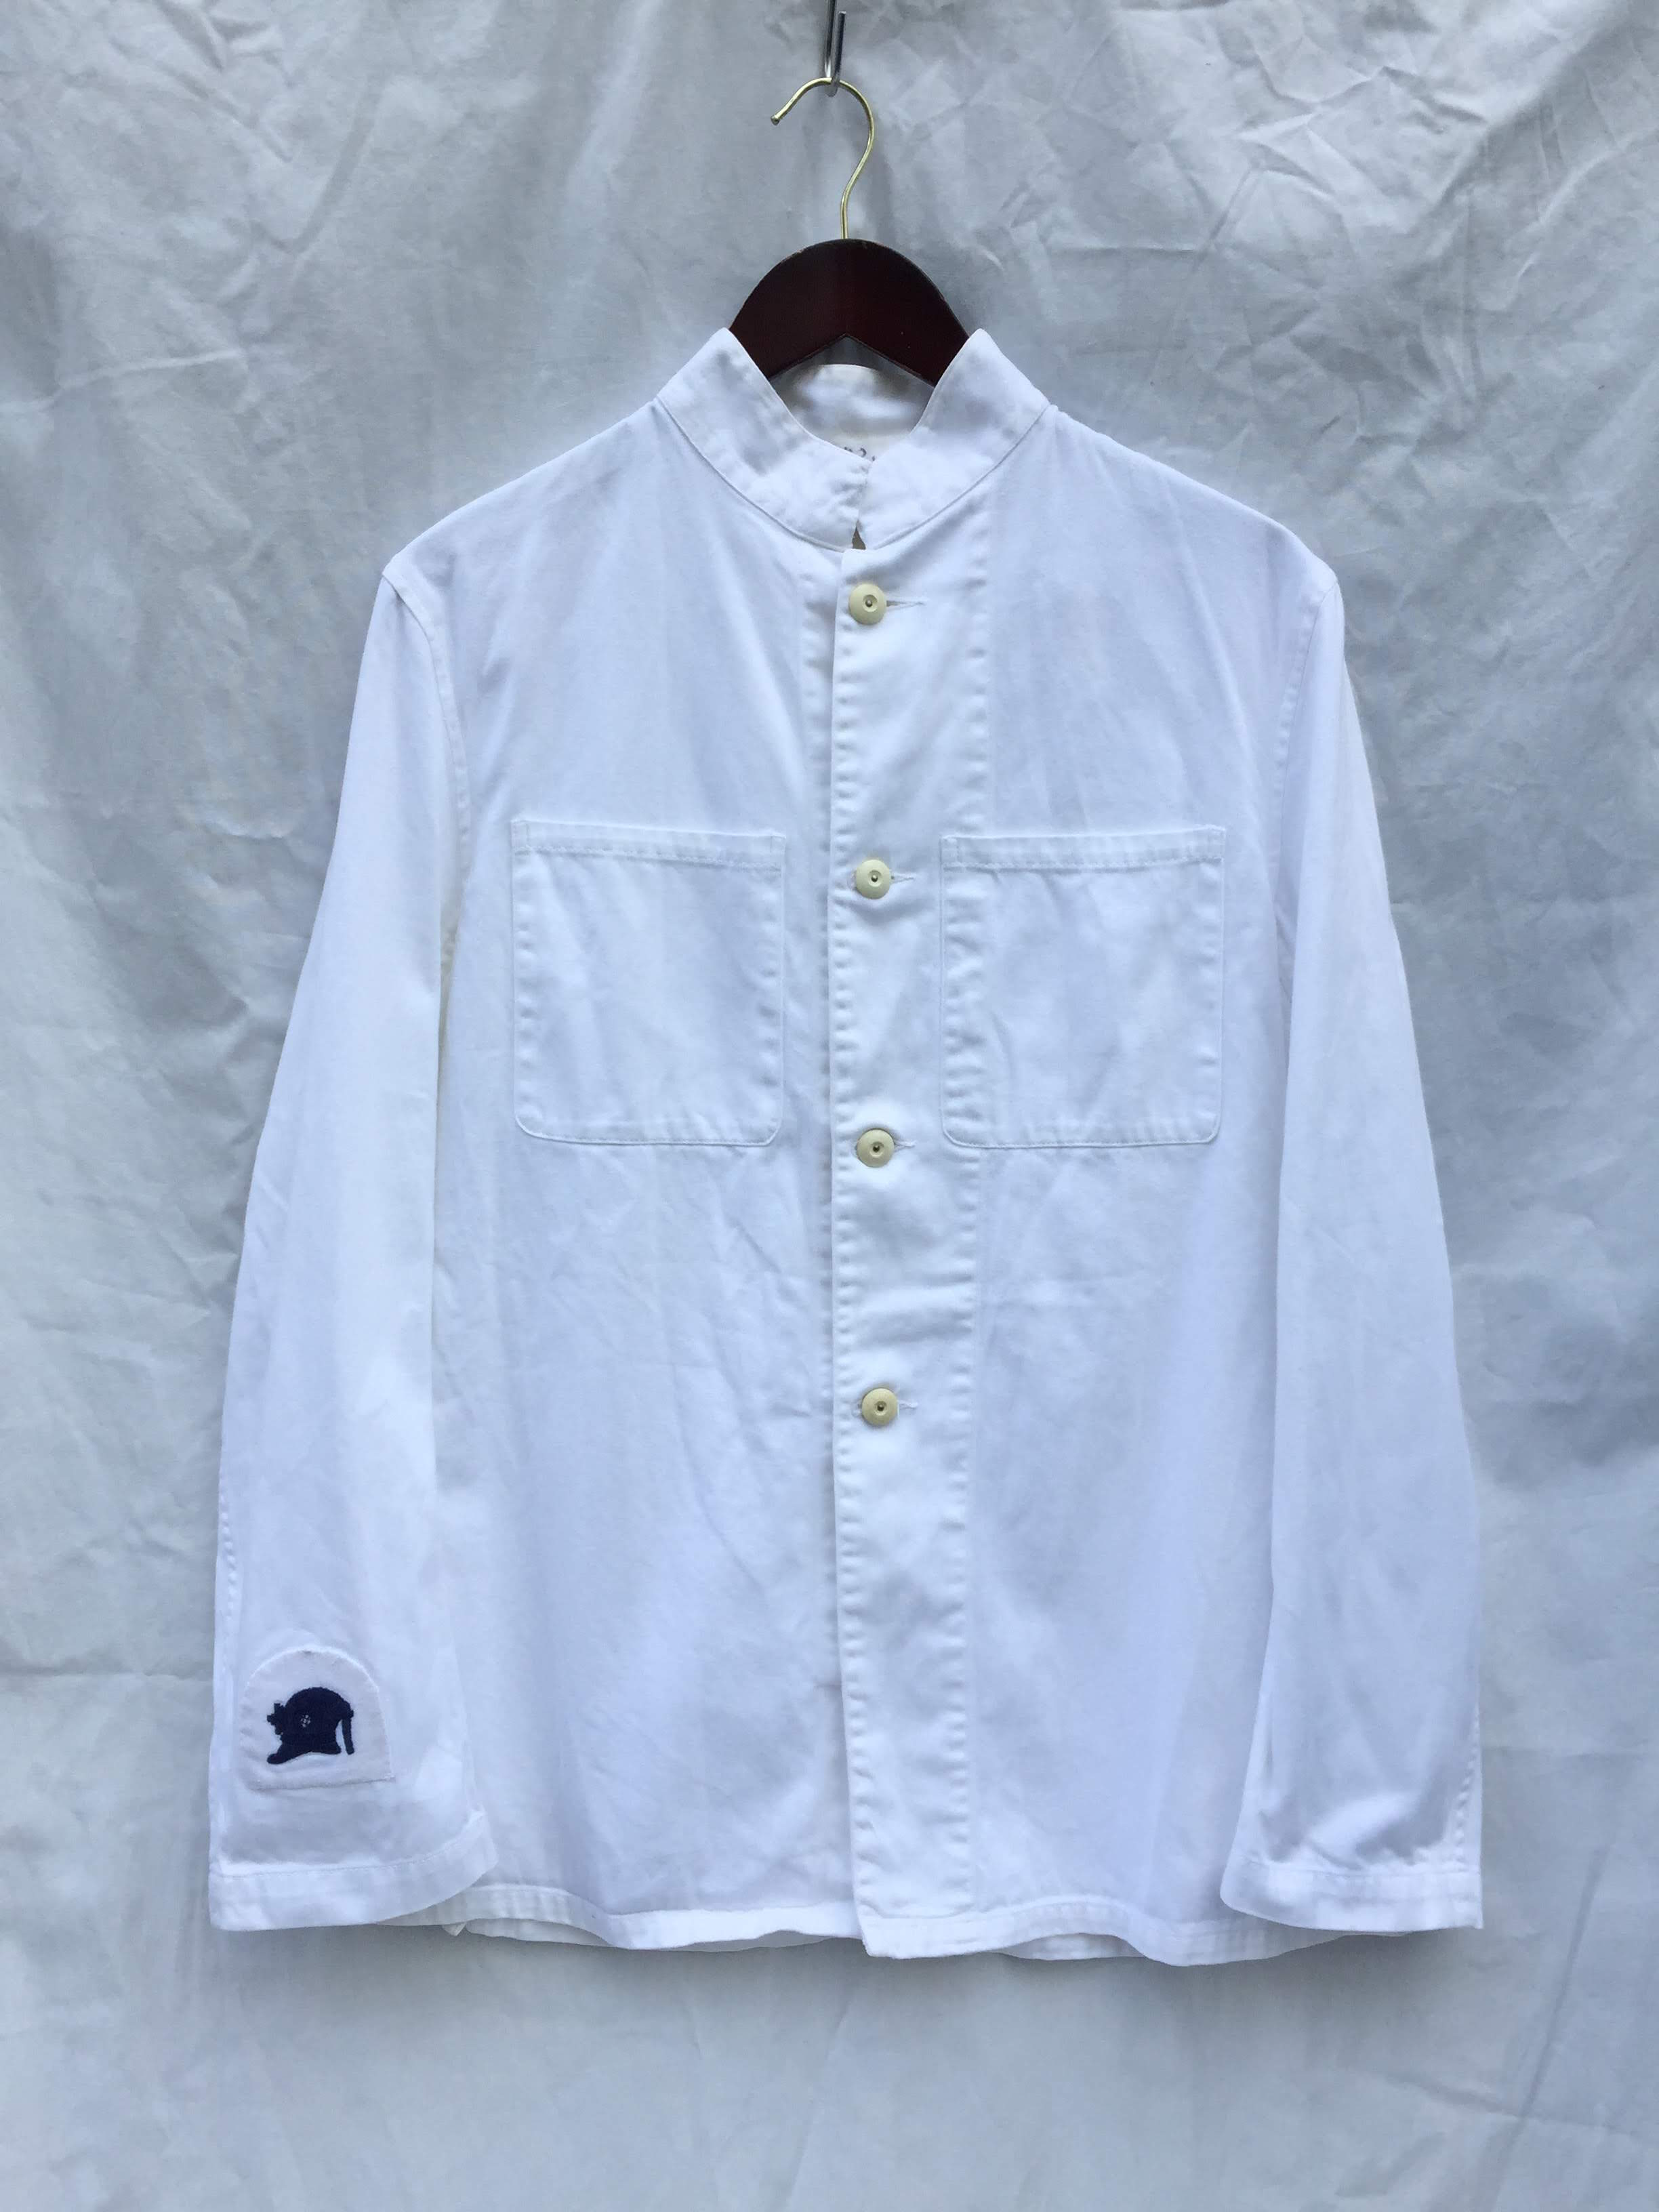 50-60's Vintage Royal Navy Officer Tunic